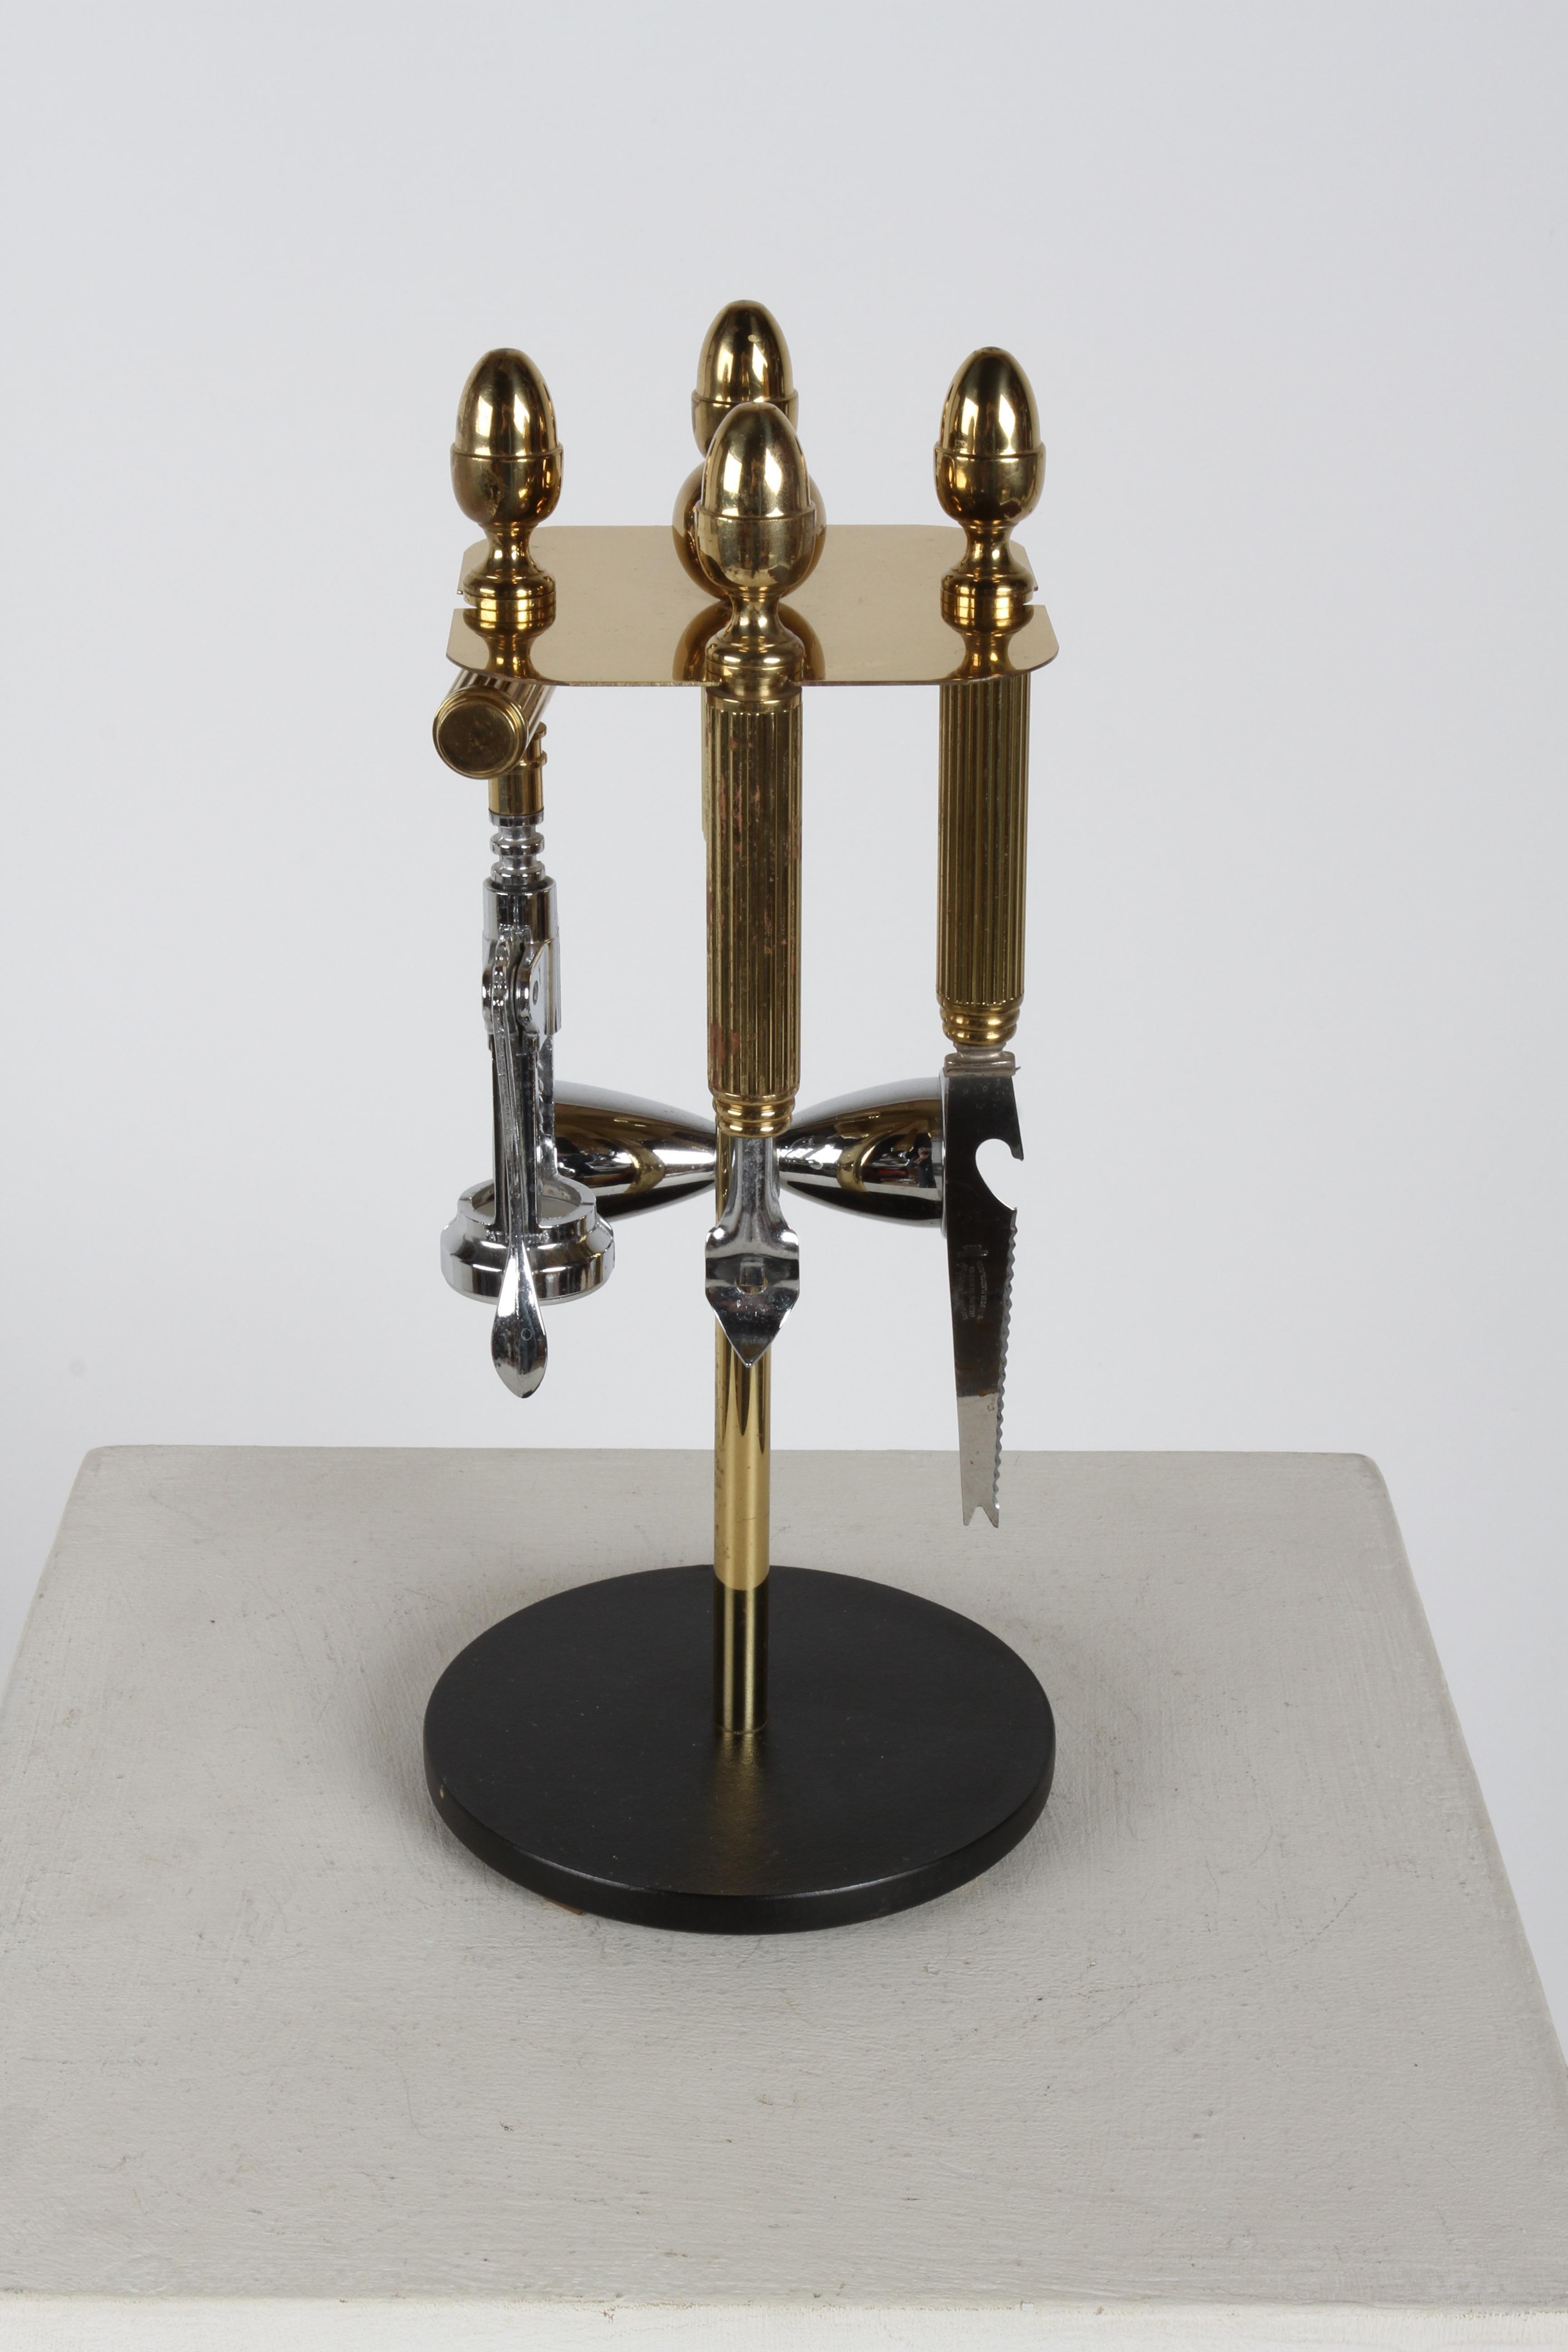 A Handsome, substantial and very well-made 4 - piece Mid-Century, Regency style brass acrorn topped set of barware or bartender tools on a circular stand by Maxwell Phillip. This set includes hourglass-shaped measuring device, aka as a jigger or